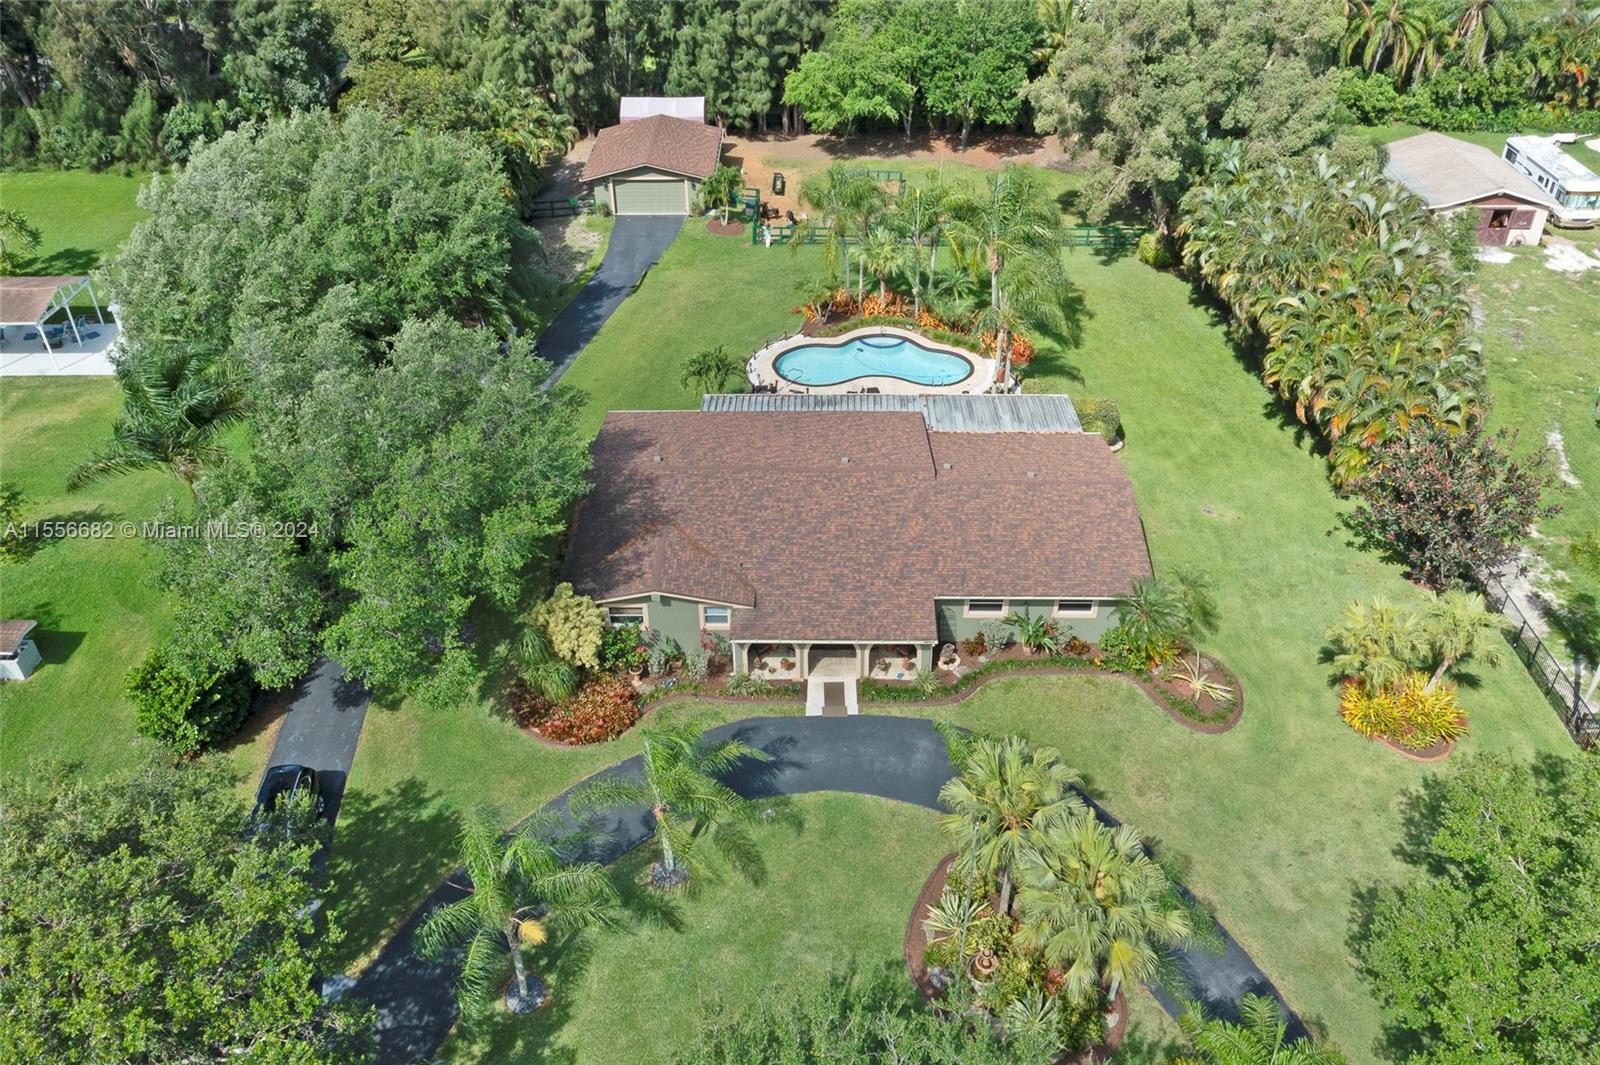 5151 Sw 163rd Ave, Southwest Ranches, Broward County, Florida - 5 Bedrooms  
4 Bathrooms - 